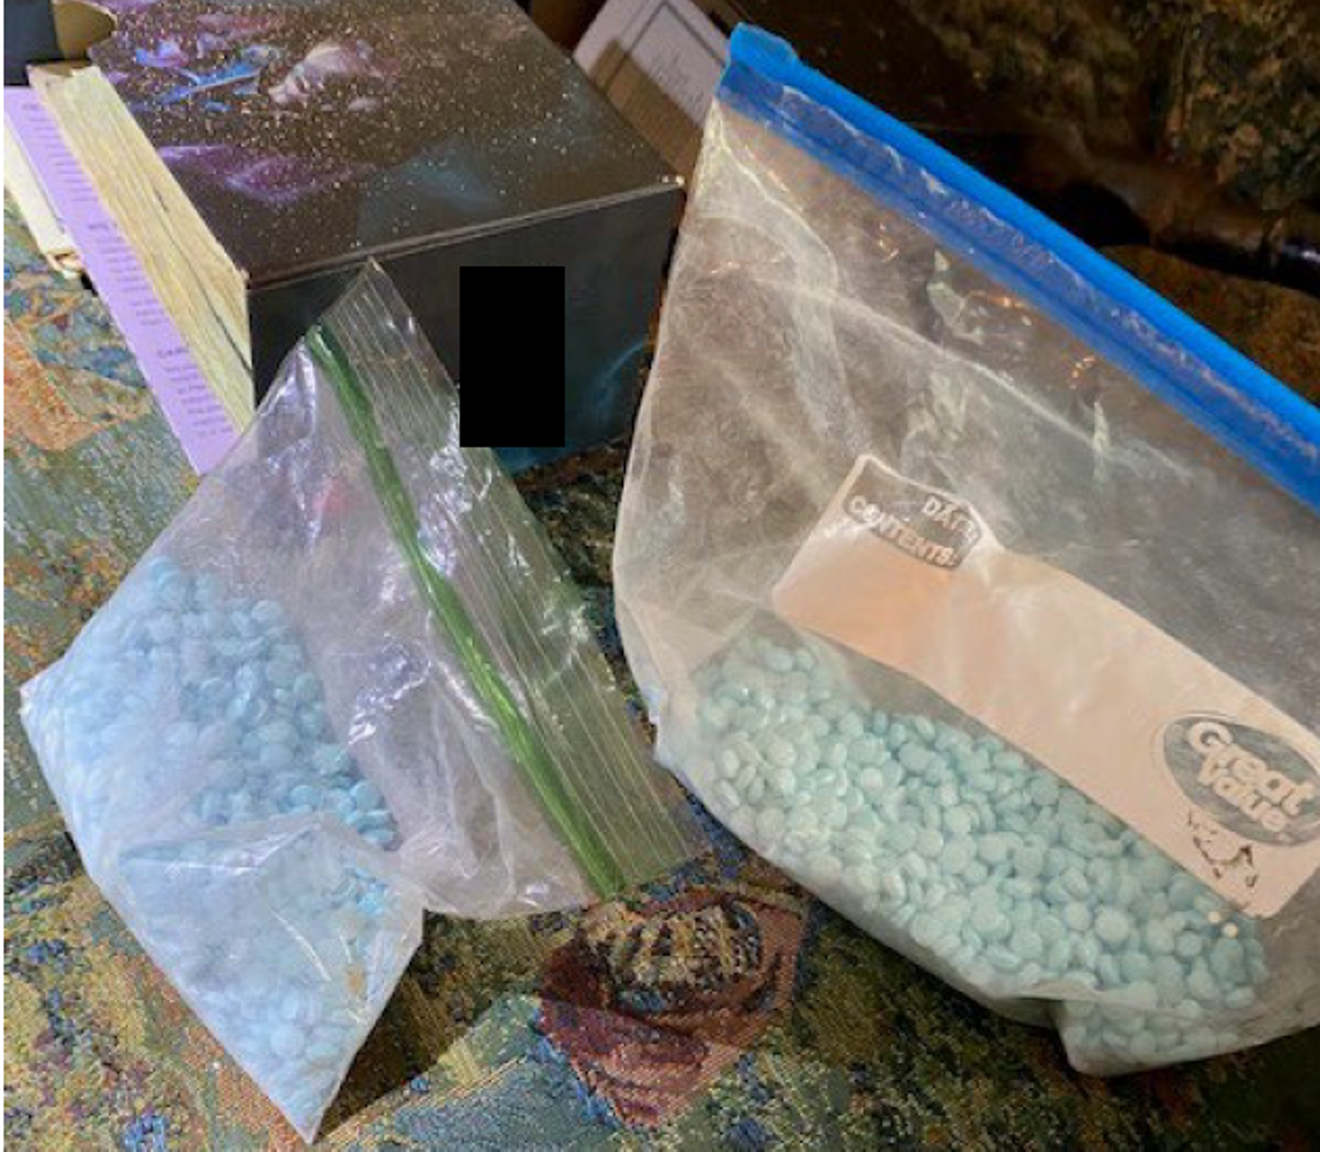 Fentanyl pills seized by local authorities in a 2023 drug bust.